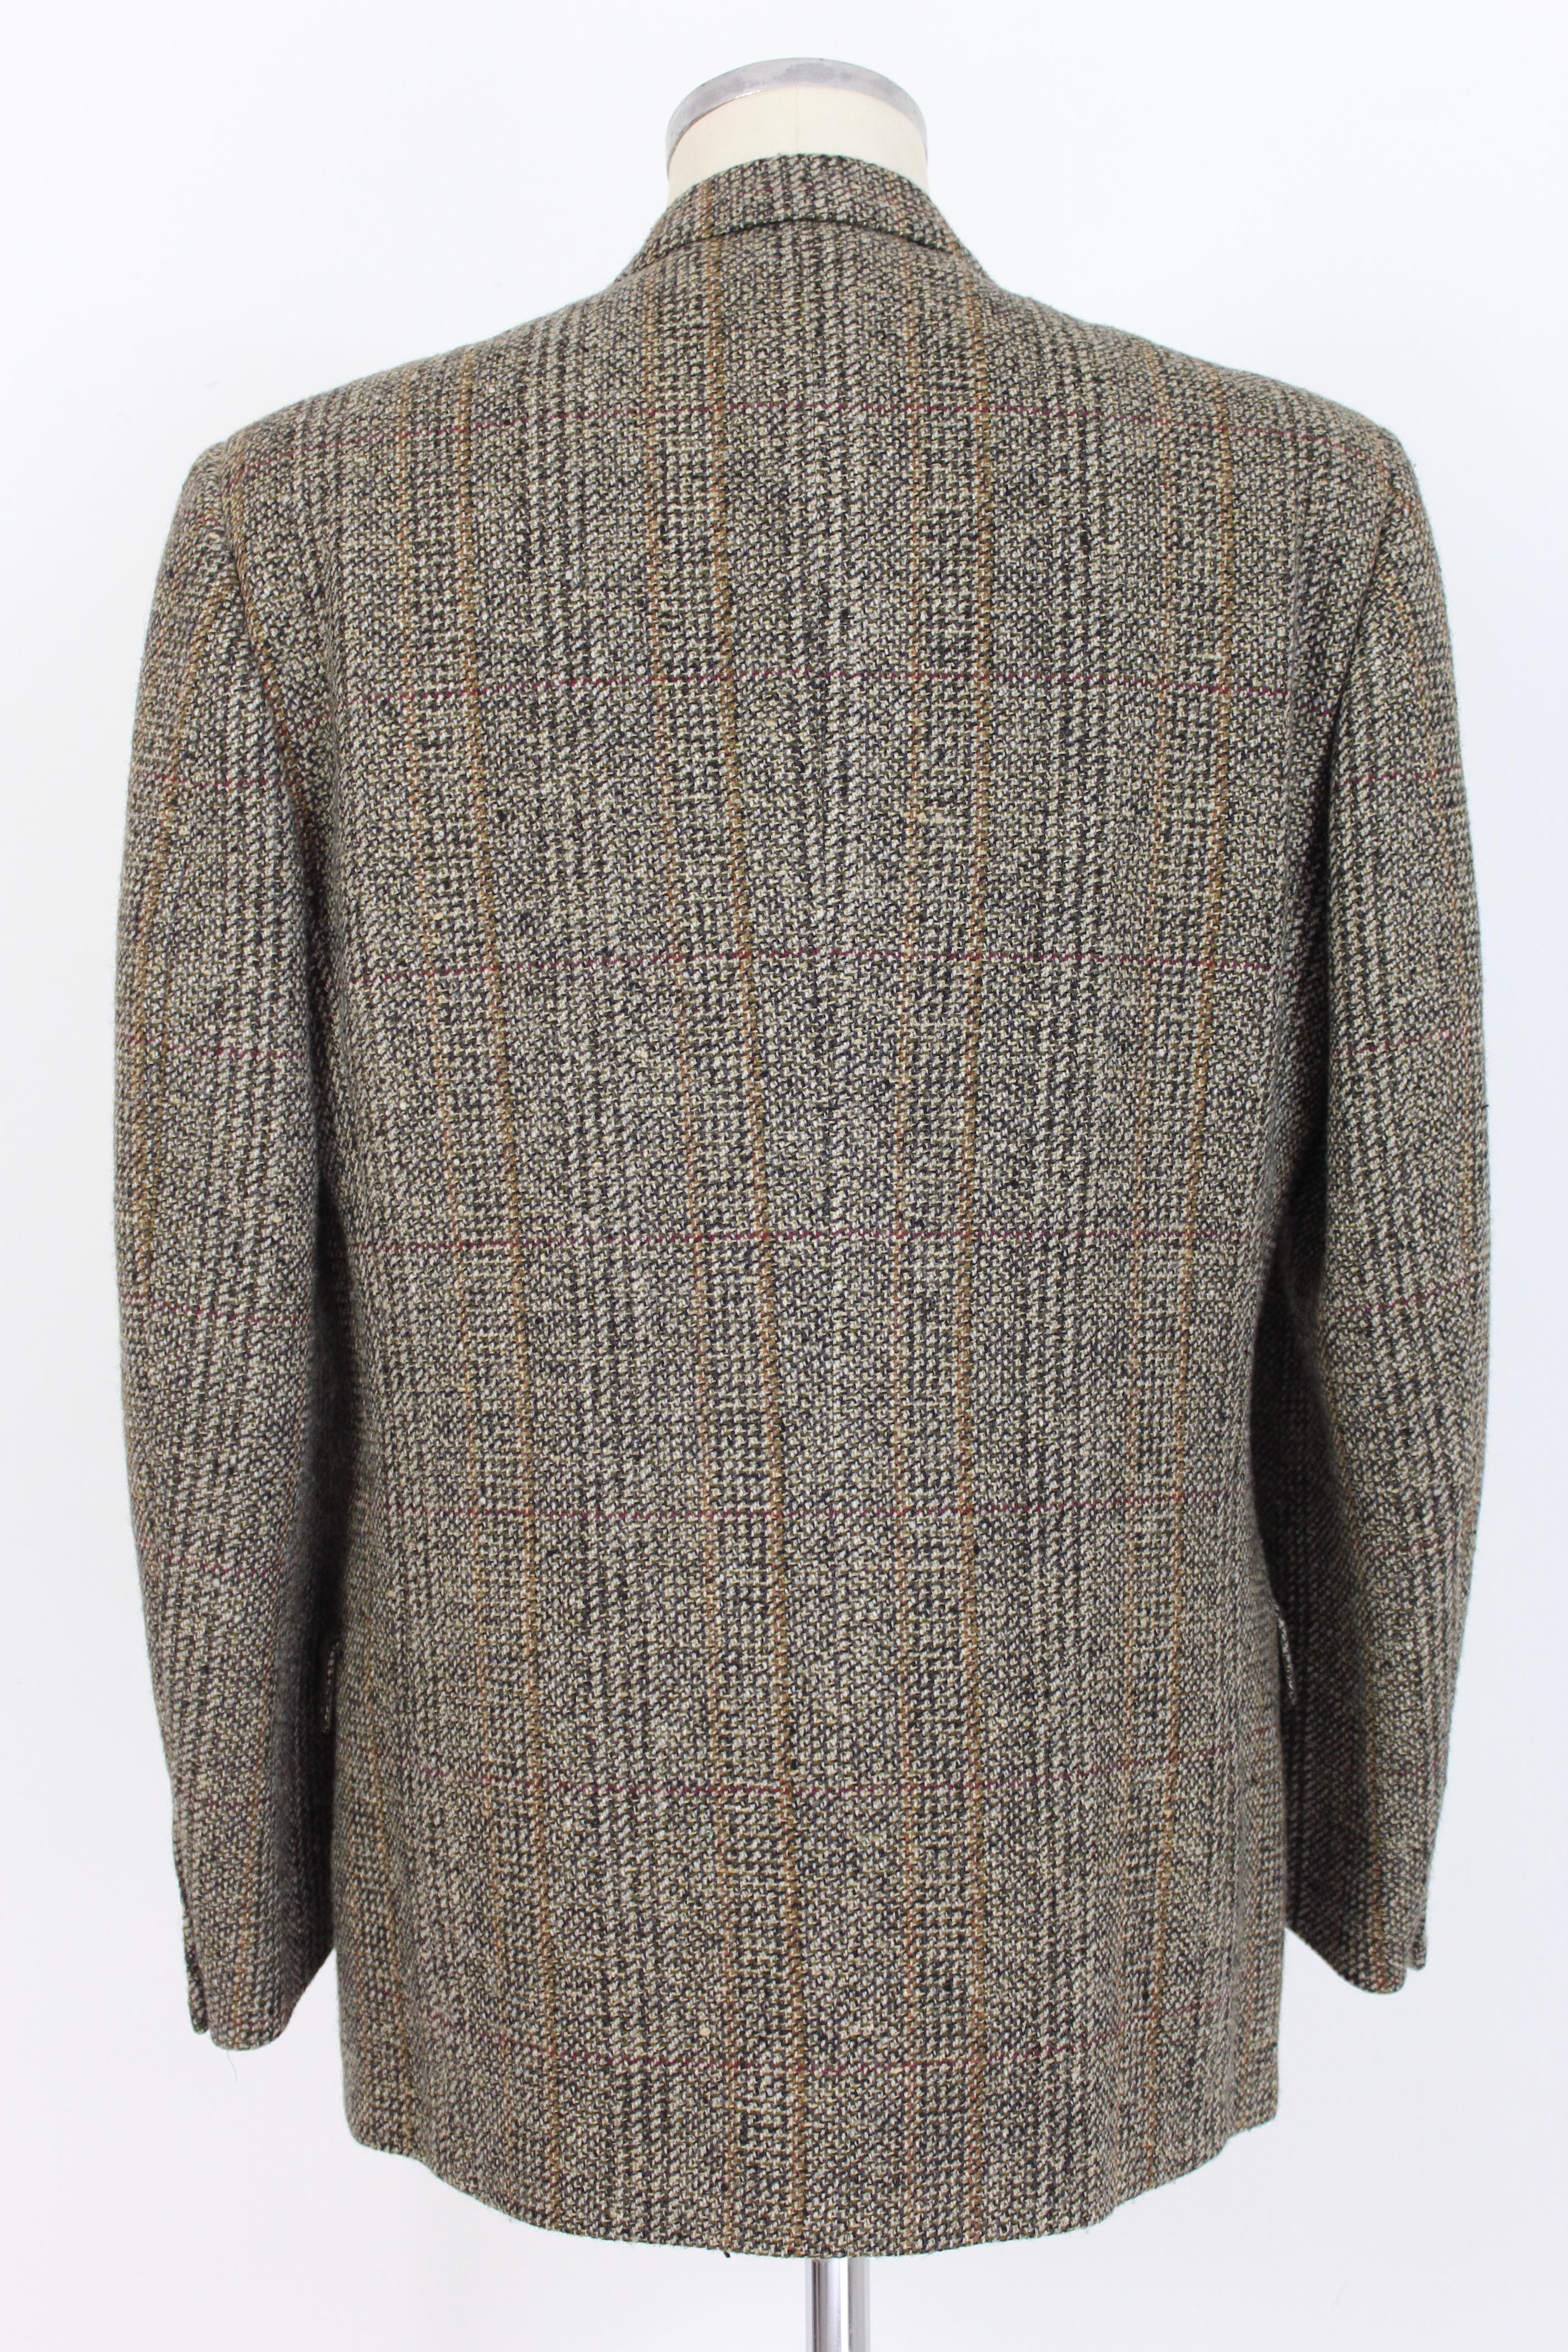 Valentino 80s vintage men's jacket. Classic jacket, double-breasted model, brown and beige in 100% virgin wool tweed fabric. Made in Italy. Excellent vintage condition.

Size: 52 It 42 Us 42 Uk

Shoulder: 52 cm
Bust / Chest: 57 cm
Sleeve: 63